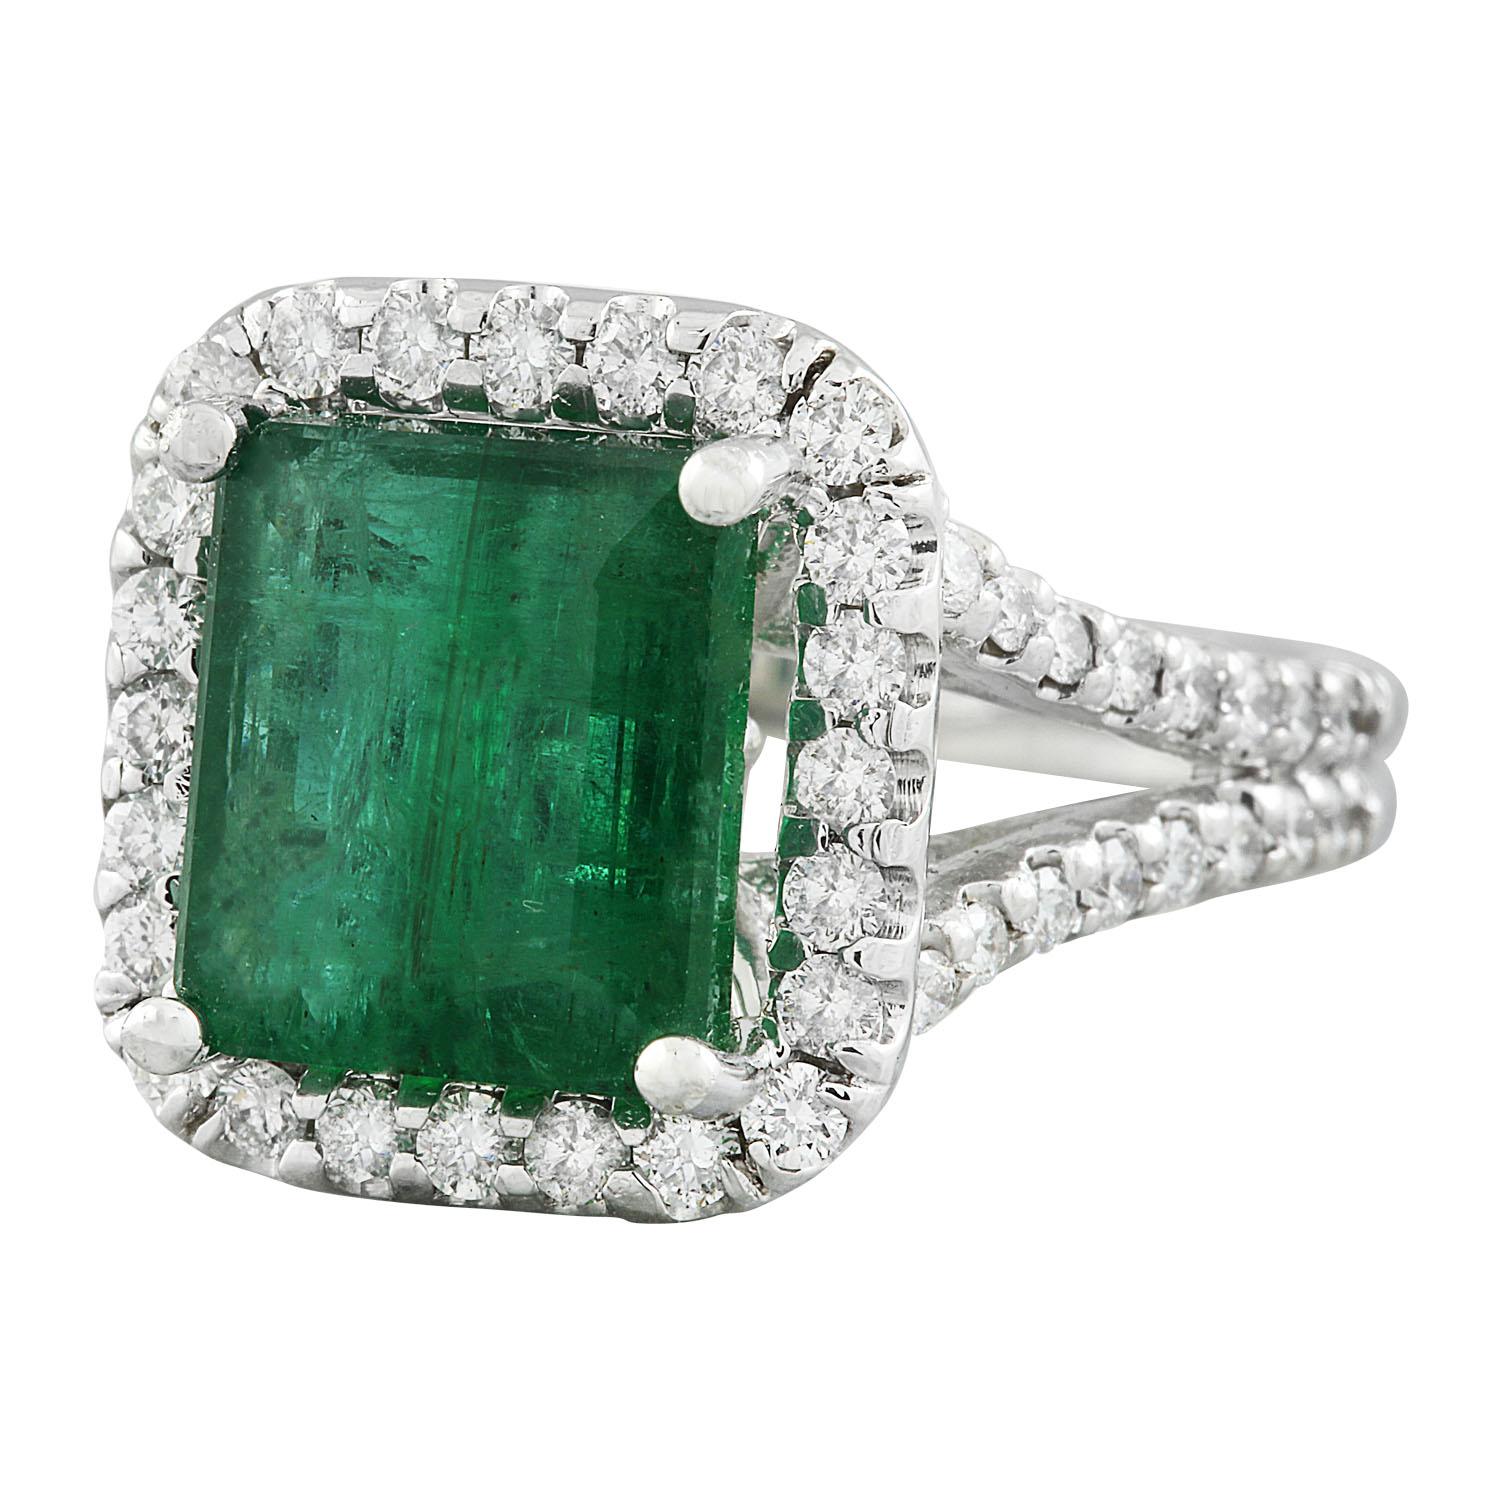 5.40 Carat Natural Emerald 14 Karat Solid White Gold Diamond Ring
Stamped: 14K 
Total Ring Weight: 7.3 Grams 
Emerald Weight 4.50 Carat (10.00x8.00 Millimeters)
Diamond Weight: 0.90 carat (F-G Color, VS2-SI1 Clarity )
Face Measures: 14.55x13.60